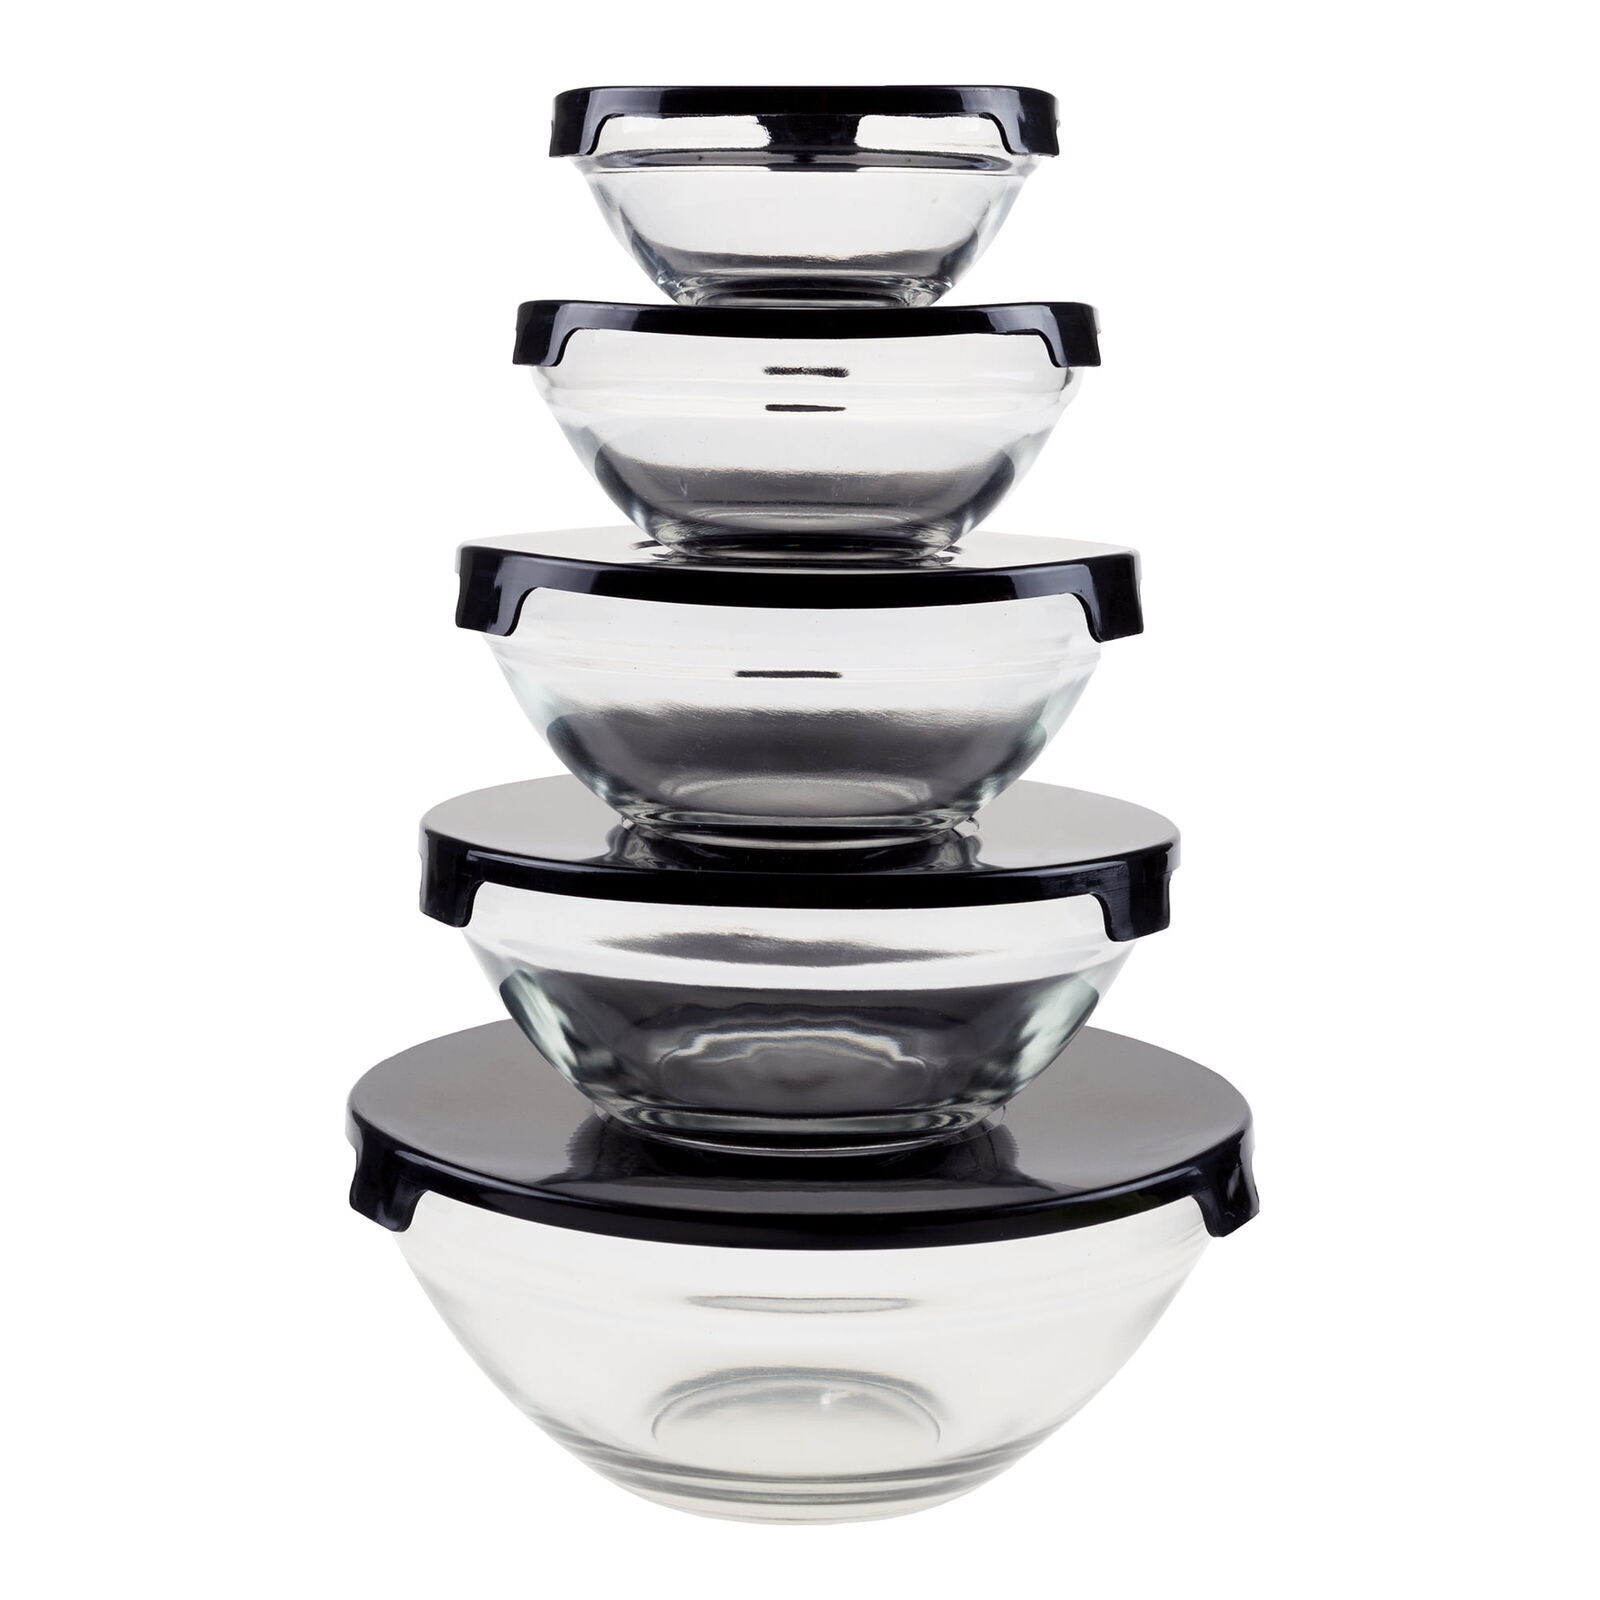 Glass Food Storage Containers with Snap Lids- 10 Piece Set by Chef Buddy (Black)